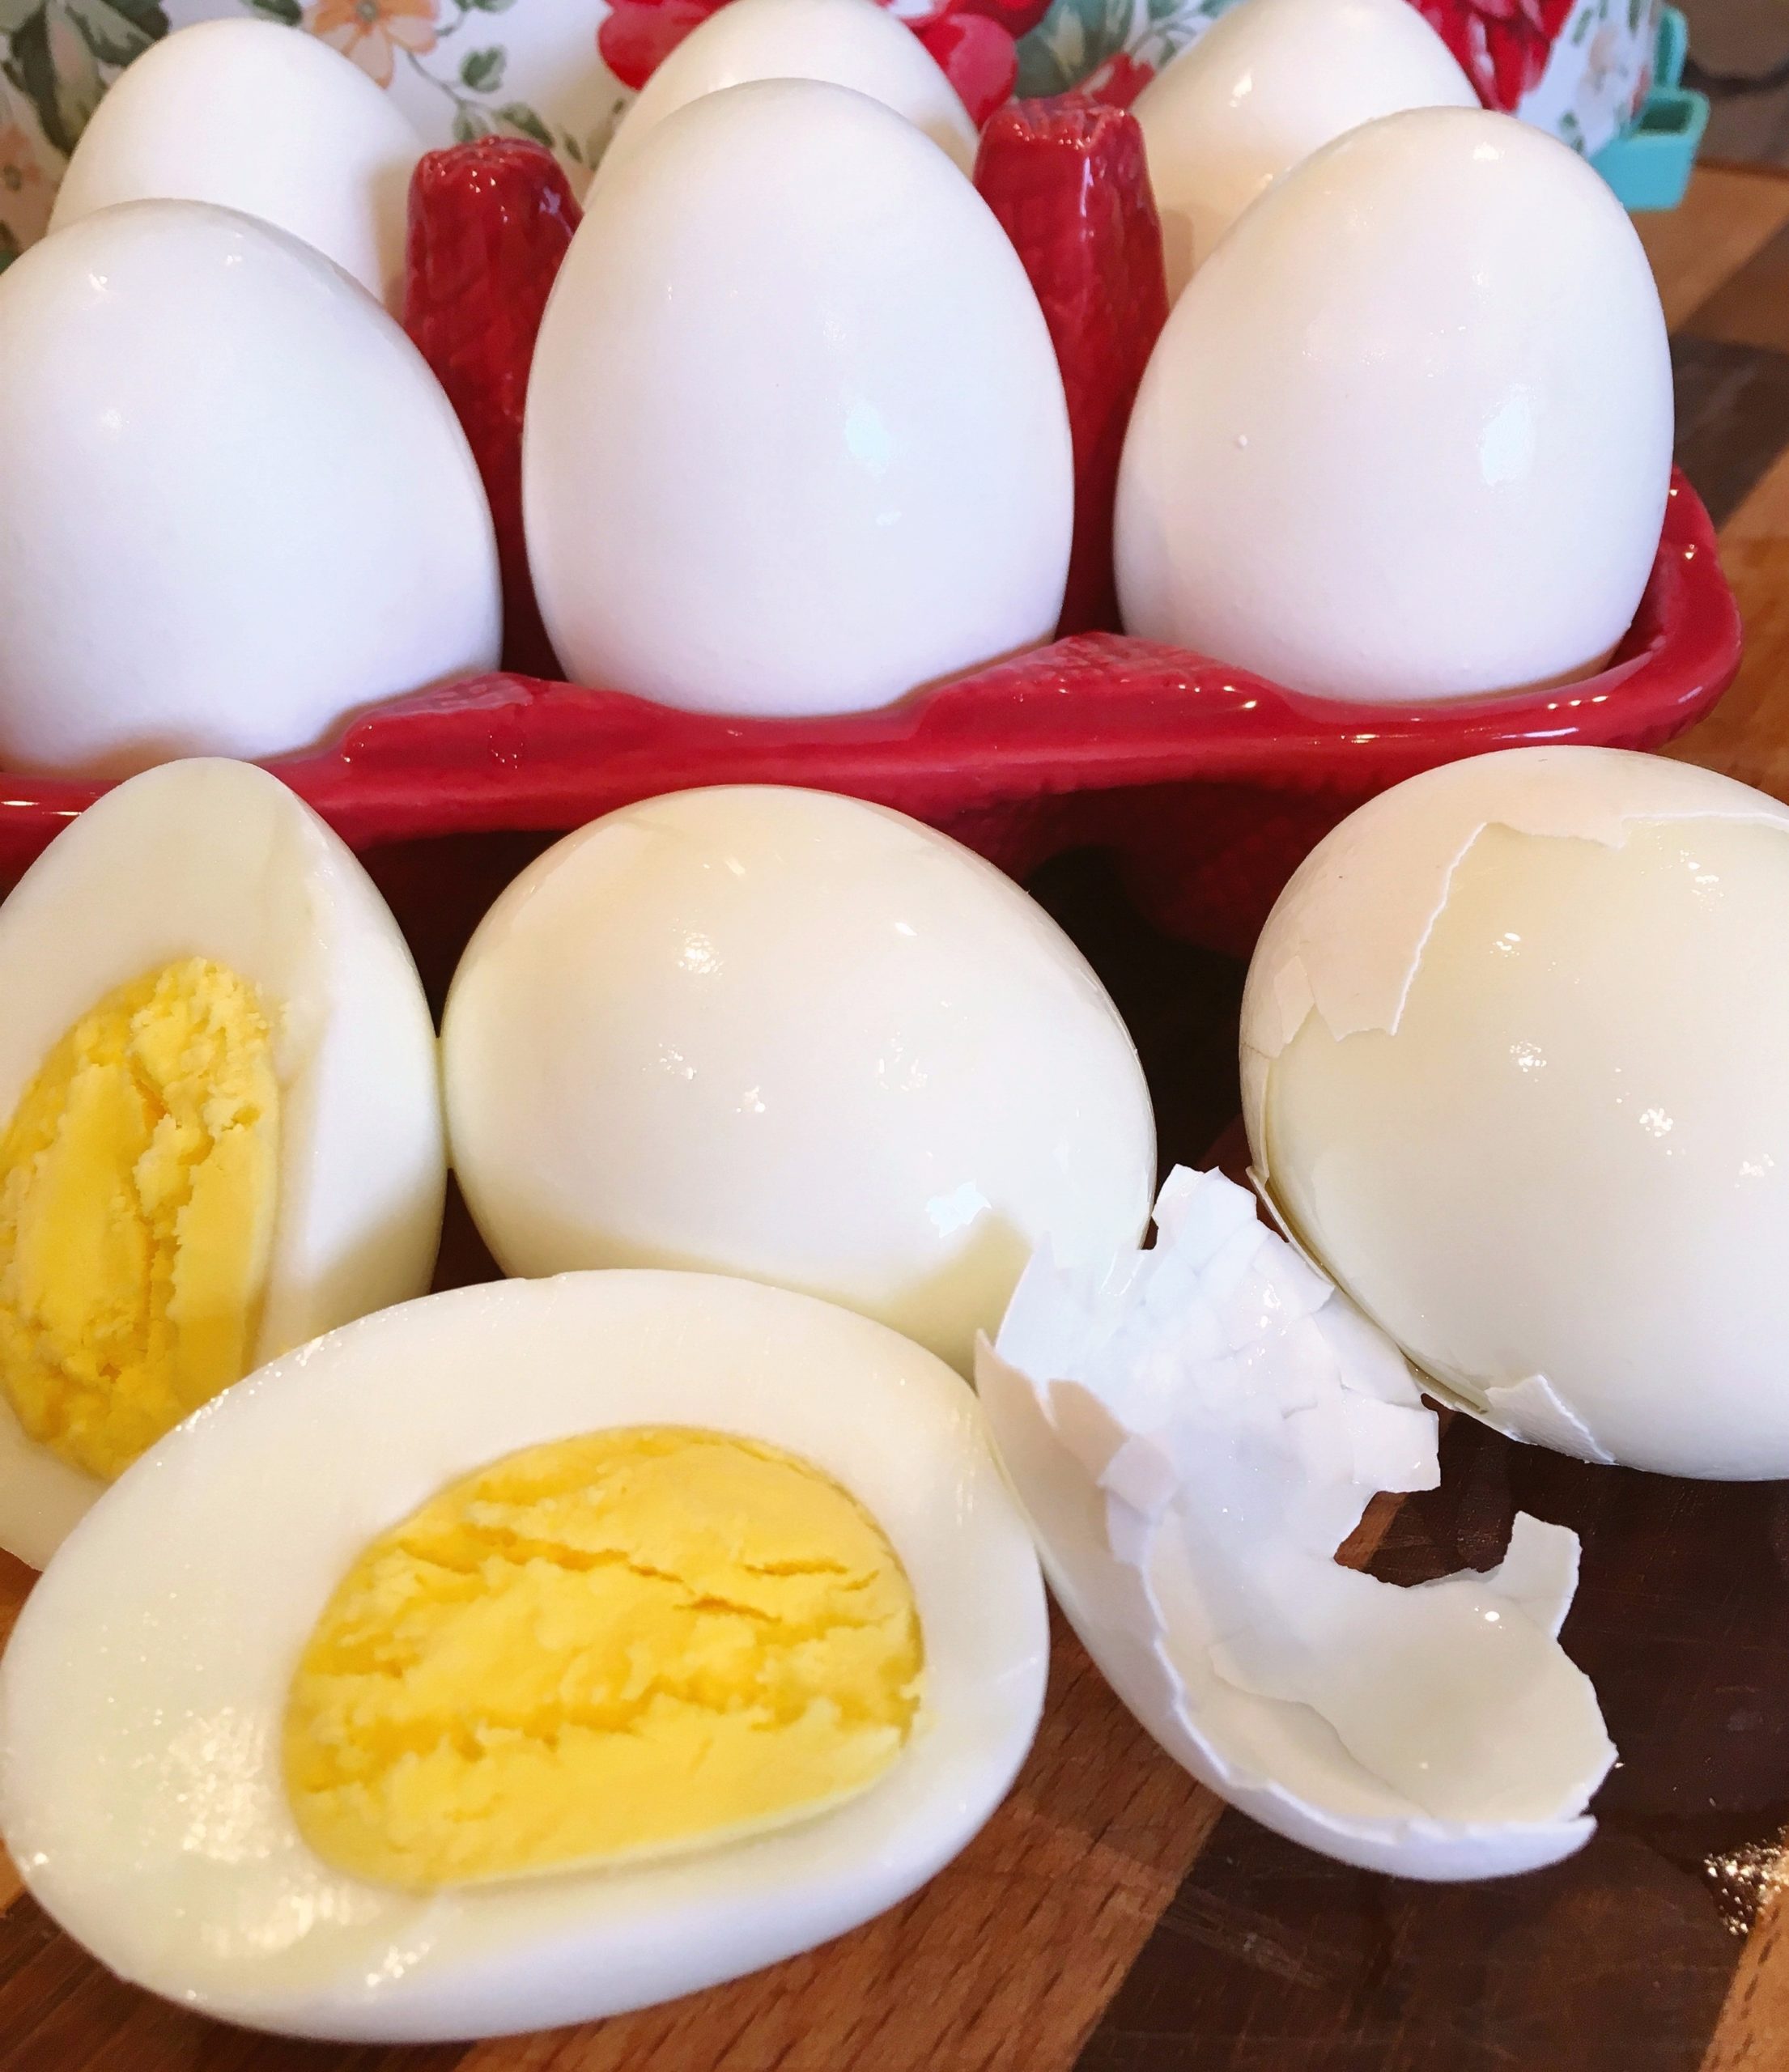 Silicone Perfect Hard Soft Boiled Eggs Maker Set